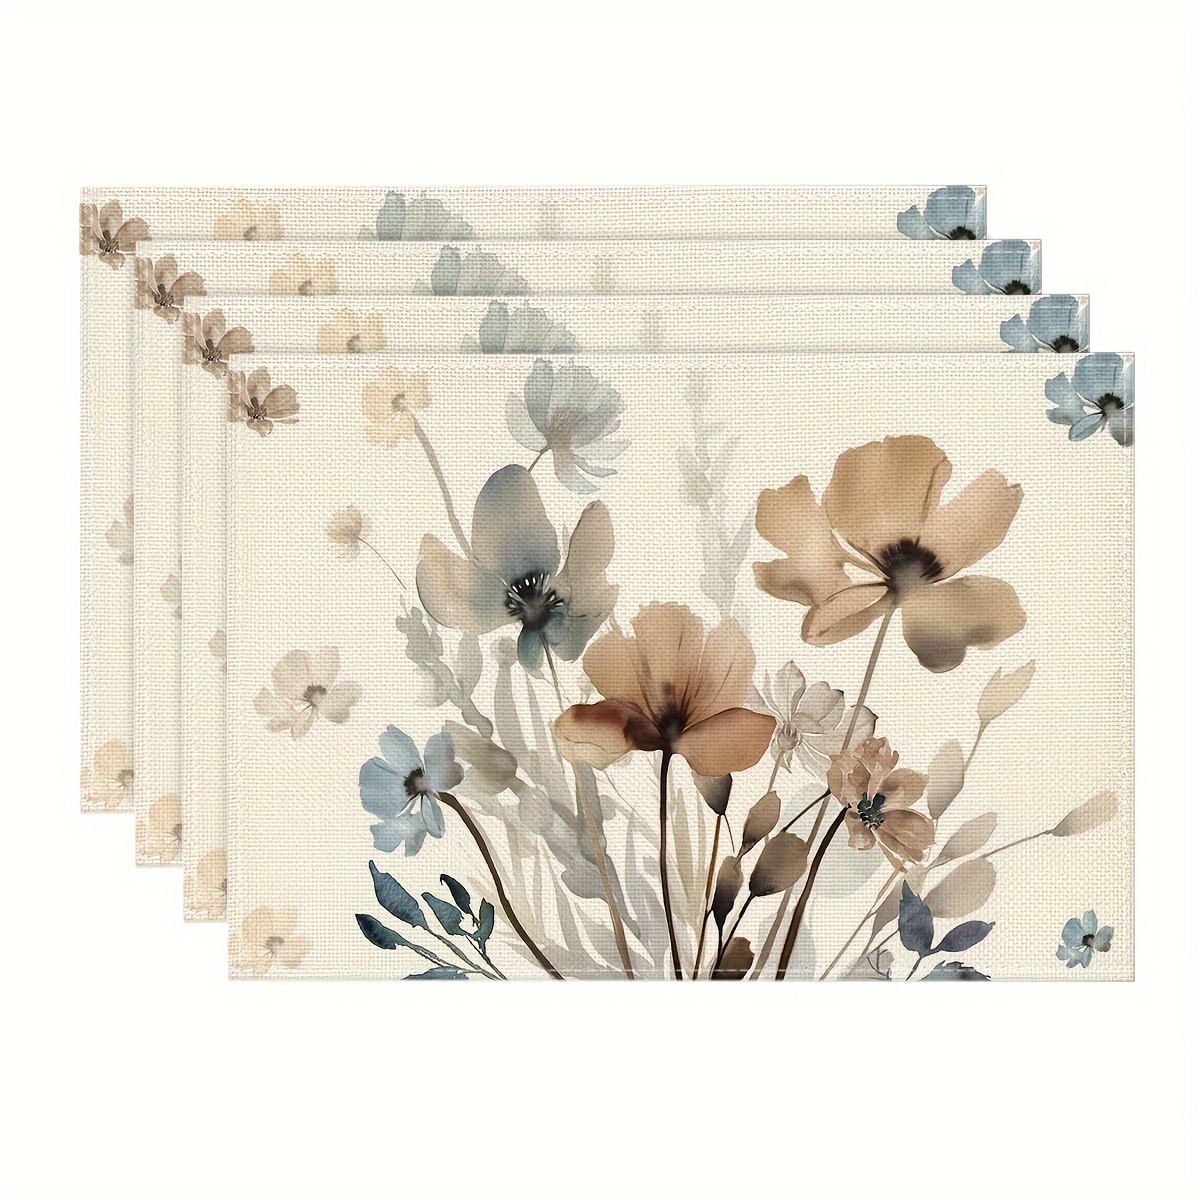 

4pcs Placemats, Brown Poppy Floral Leaves Spring Placemats, Seasonal Summer Table Mats For Party Kitchen Dining Decoration, 12x18 Inch